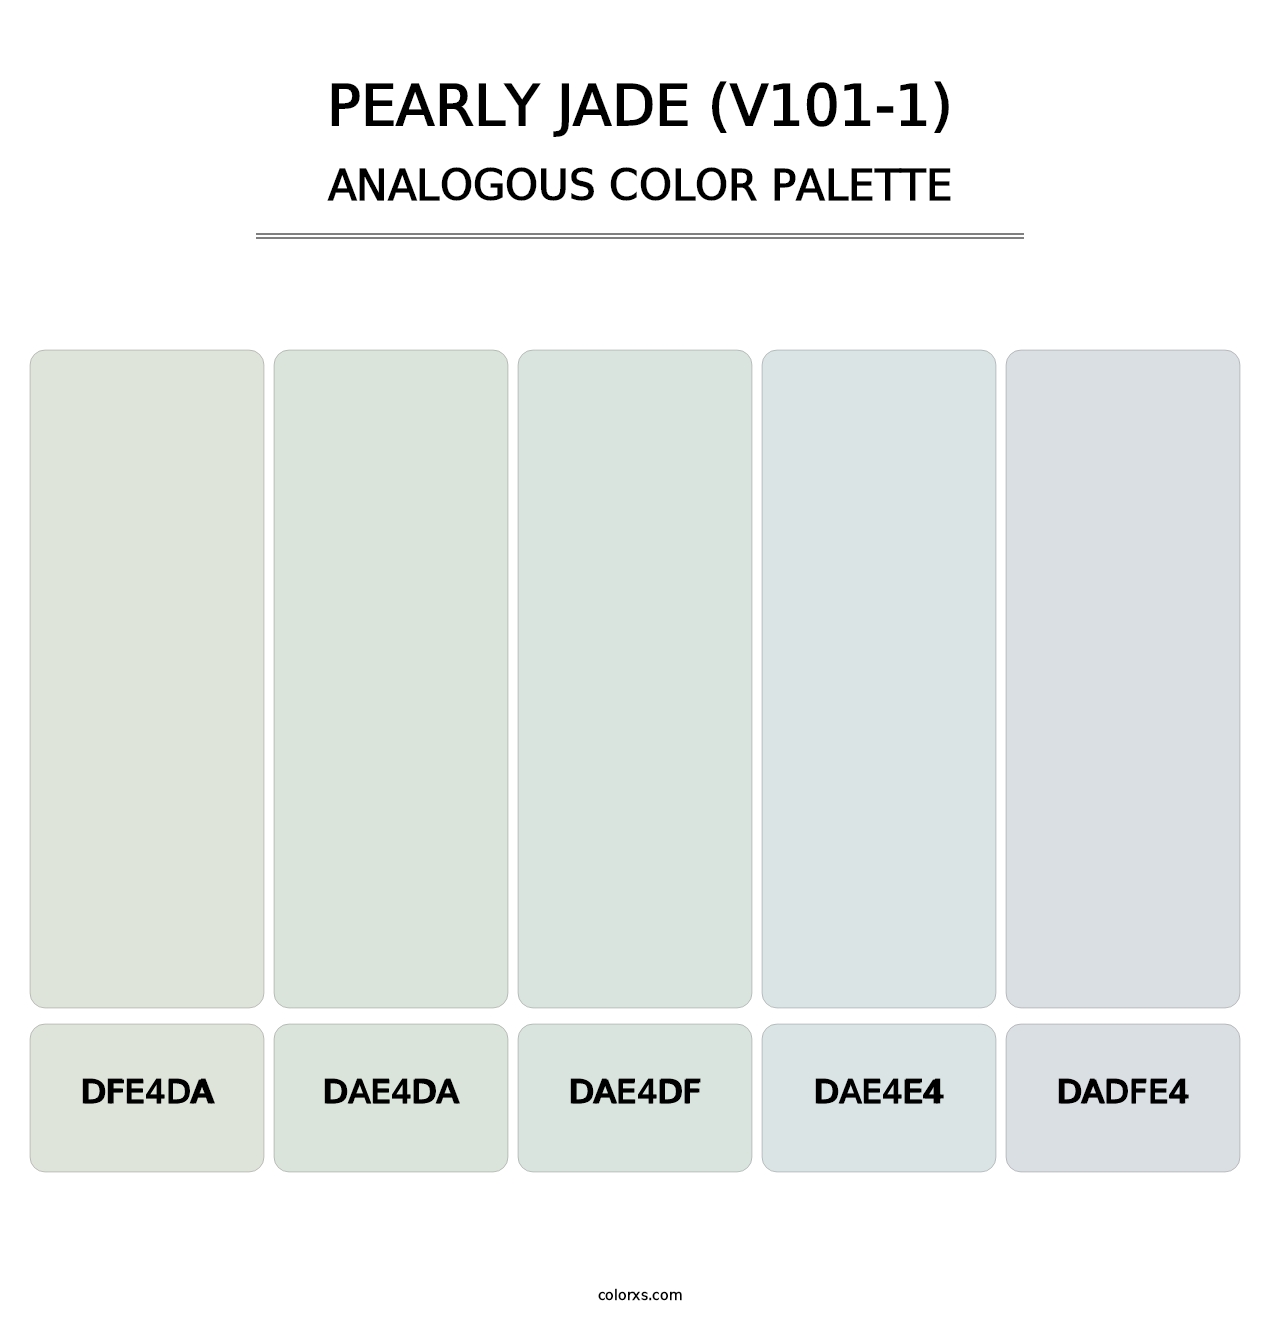 Pearly Jade (V101-1) - Analogous Color Palette